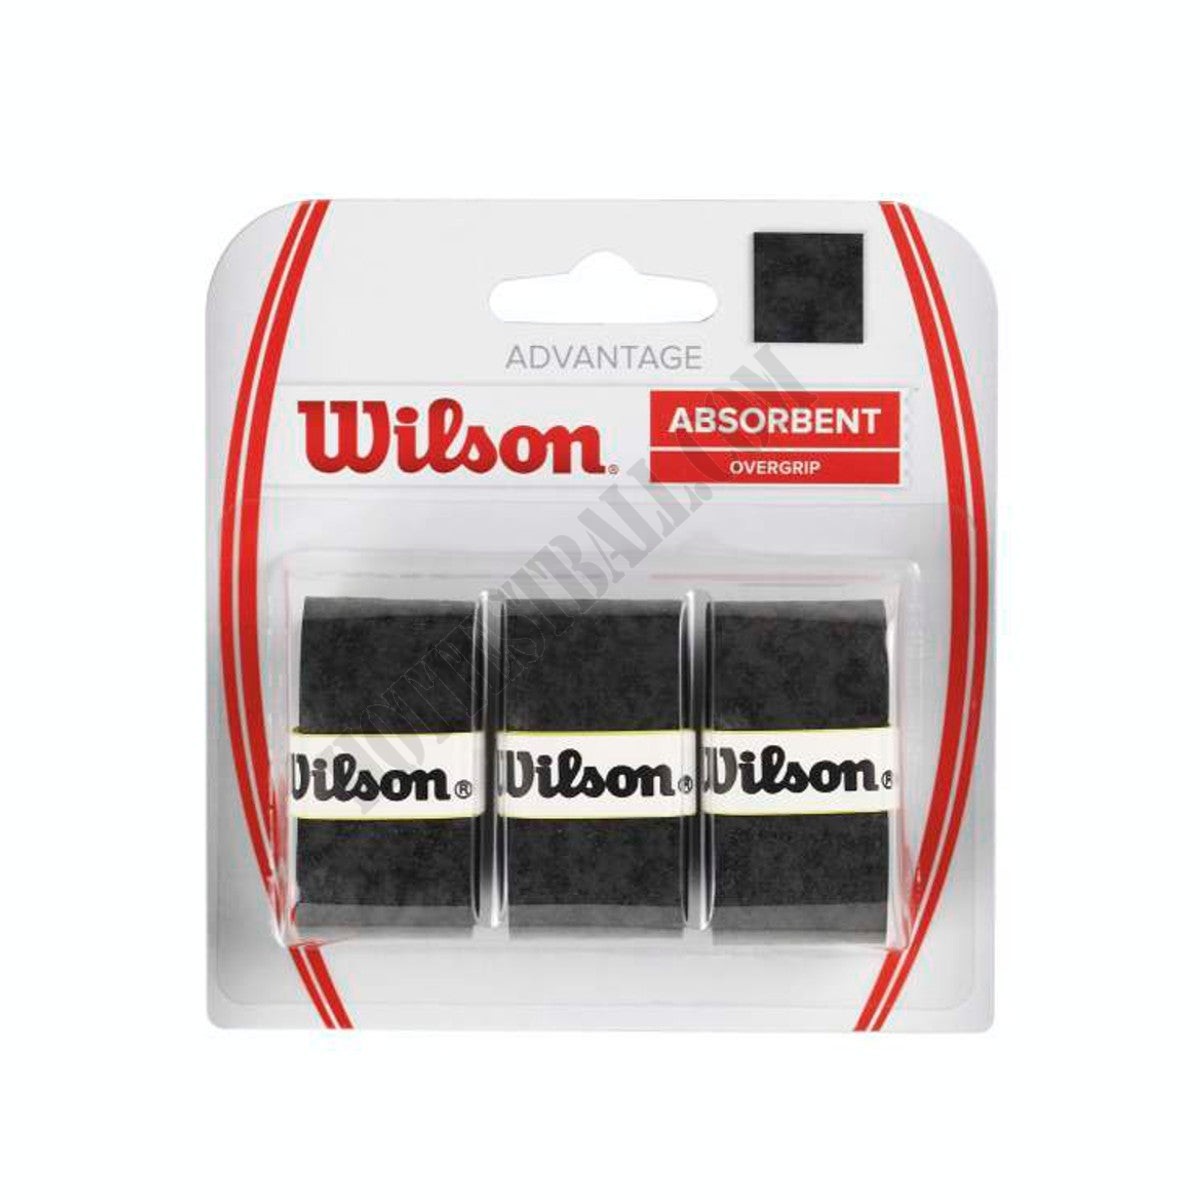 Advantage Overgip, 3 Pack - Wilson Discount Store - Advantage Overgip, 3 Pack - Wilson Discount Store